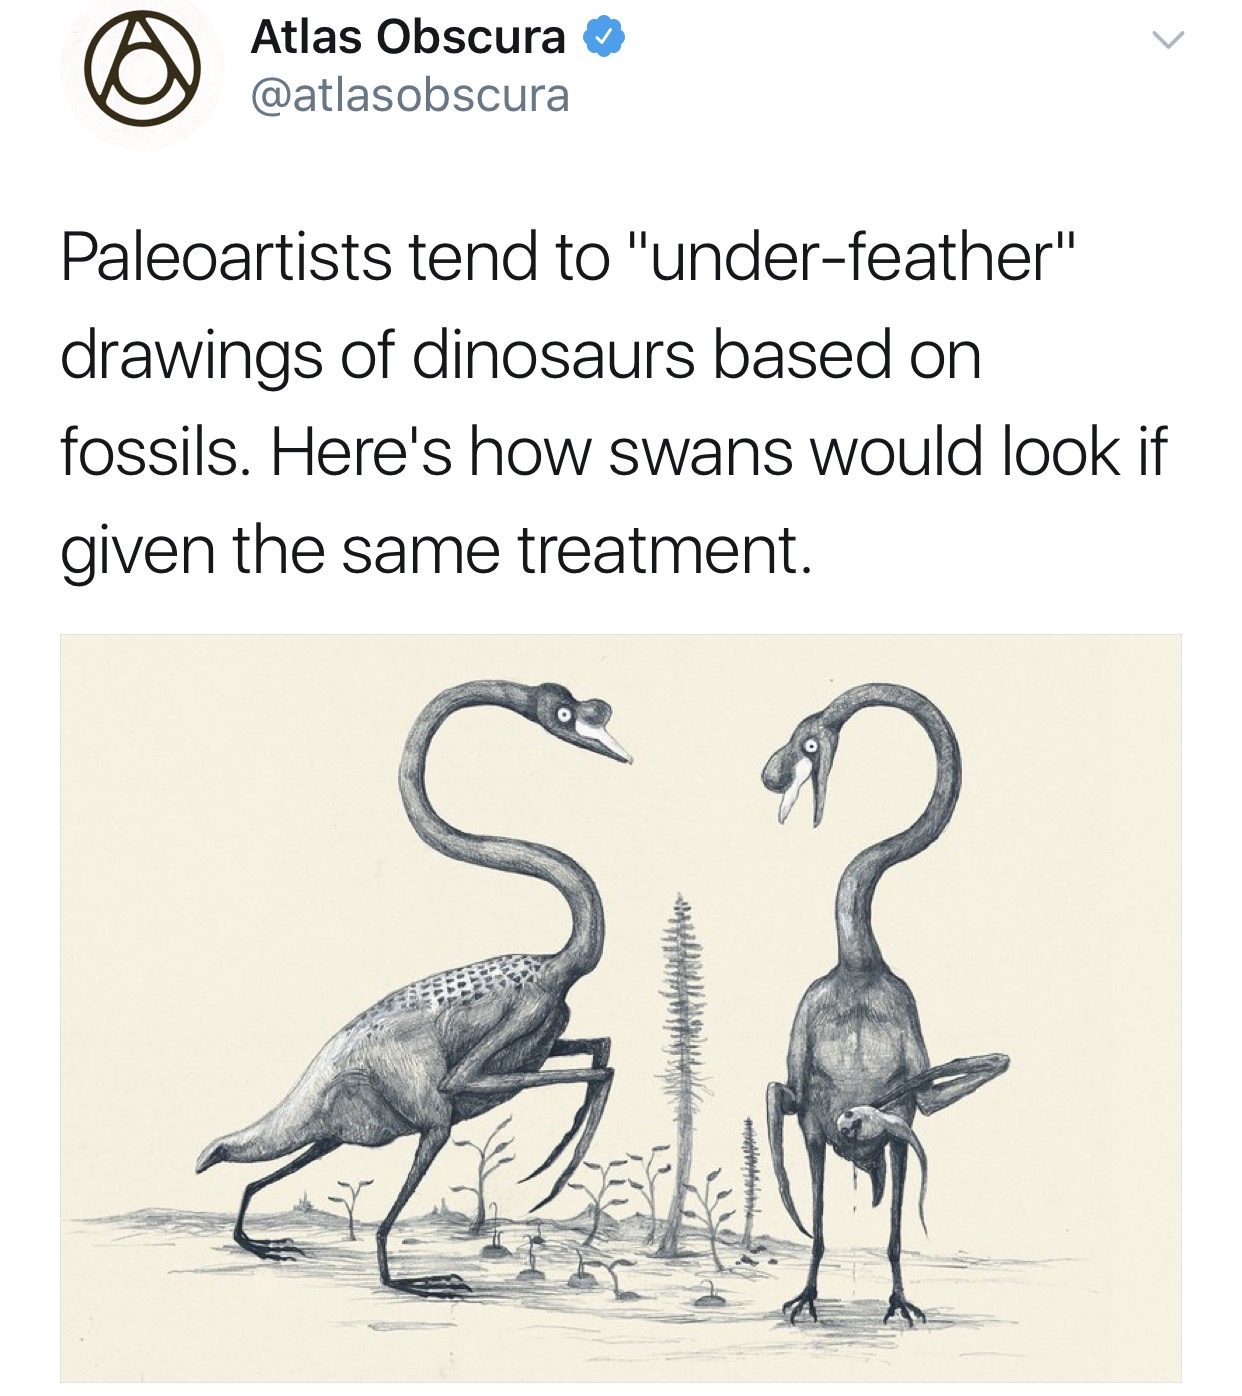 under feathered dinosaurs - Atlas Obscura Paleoartists tend to "underfeather" drawings of dinosaurs based on fossils. Here's how swans would look if given the same treatment.